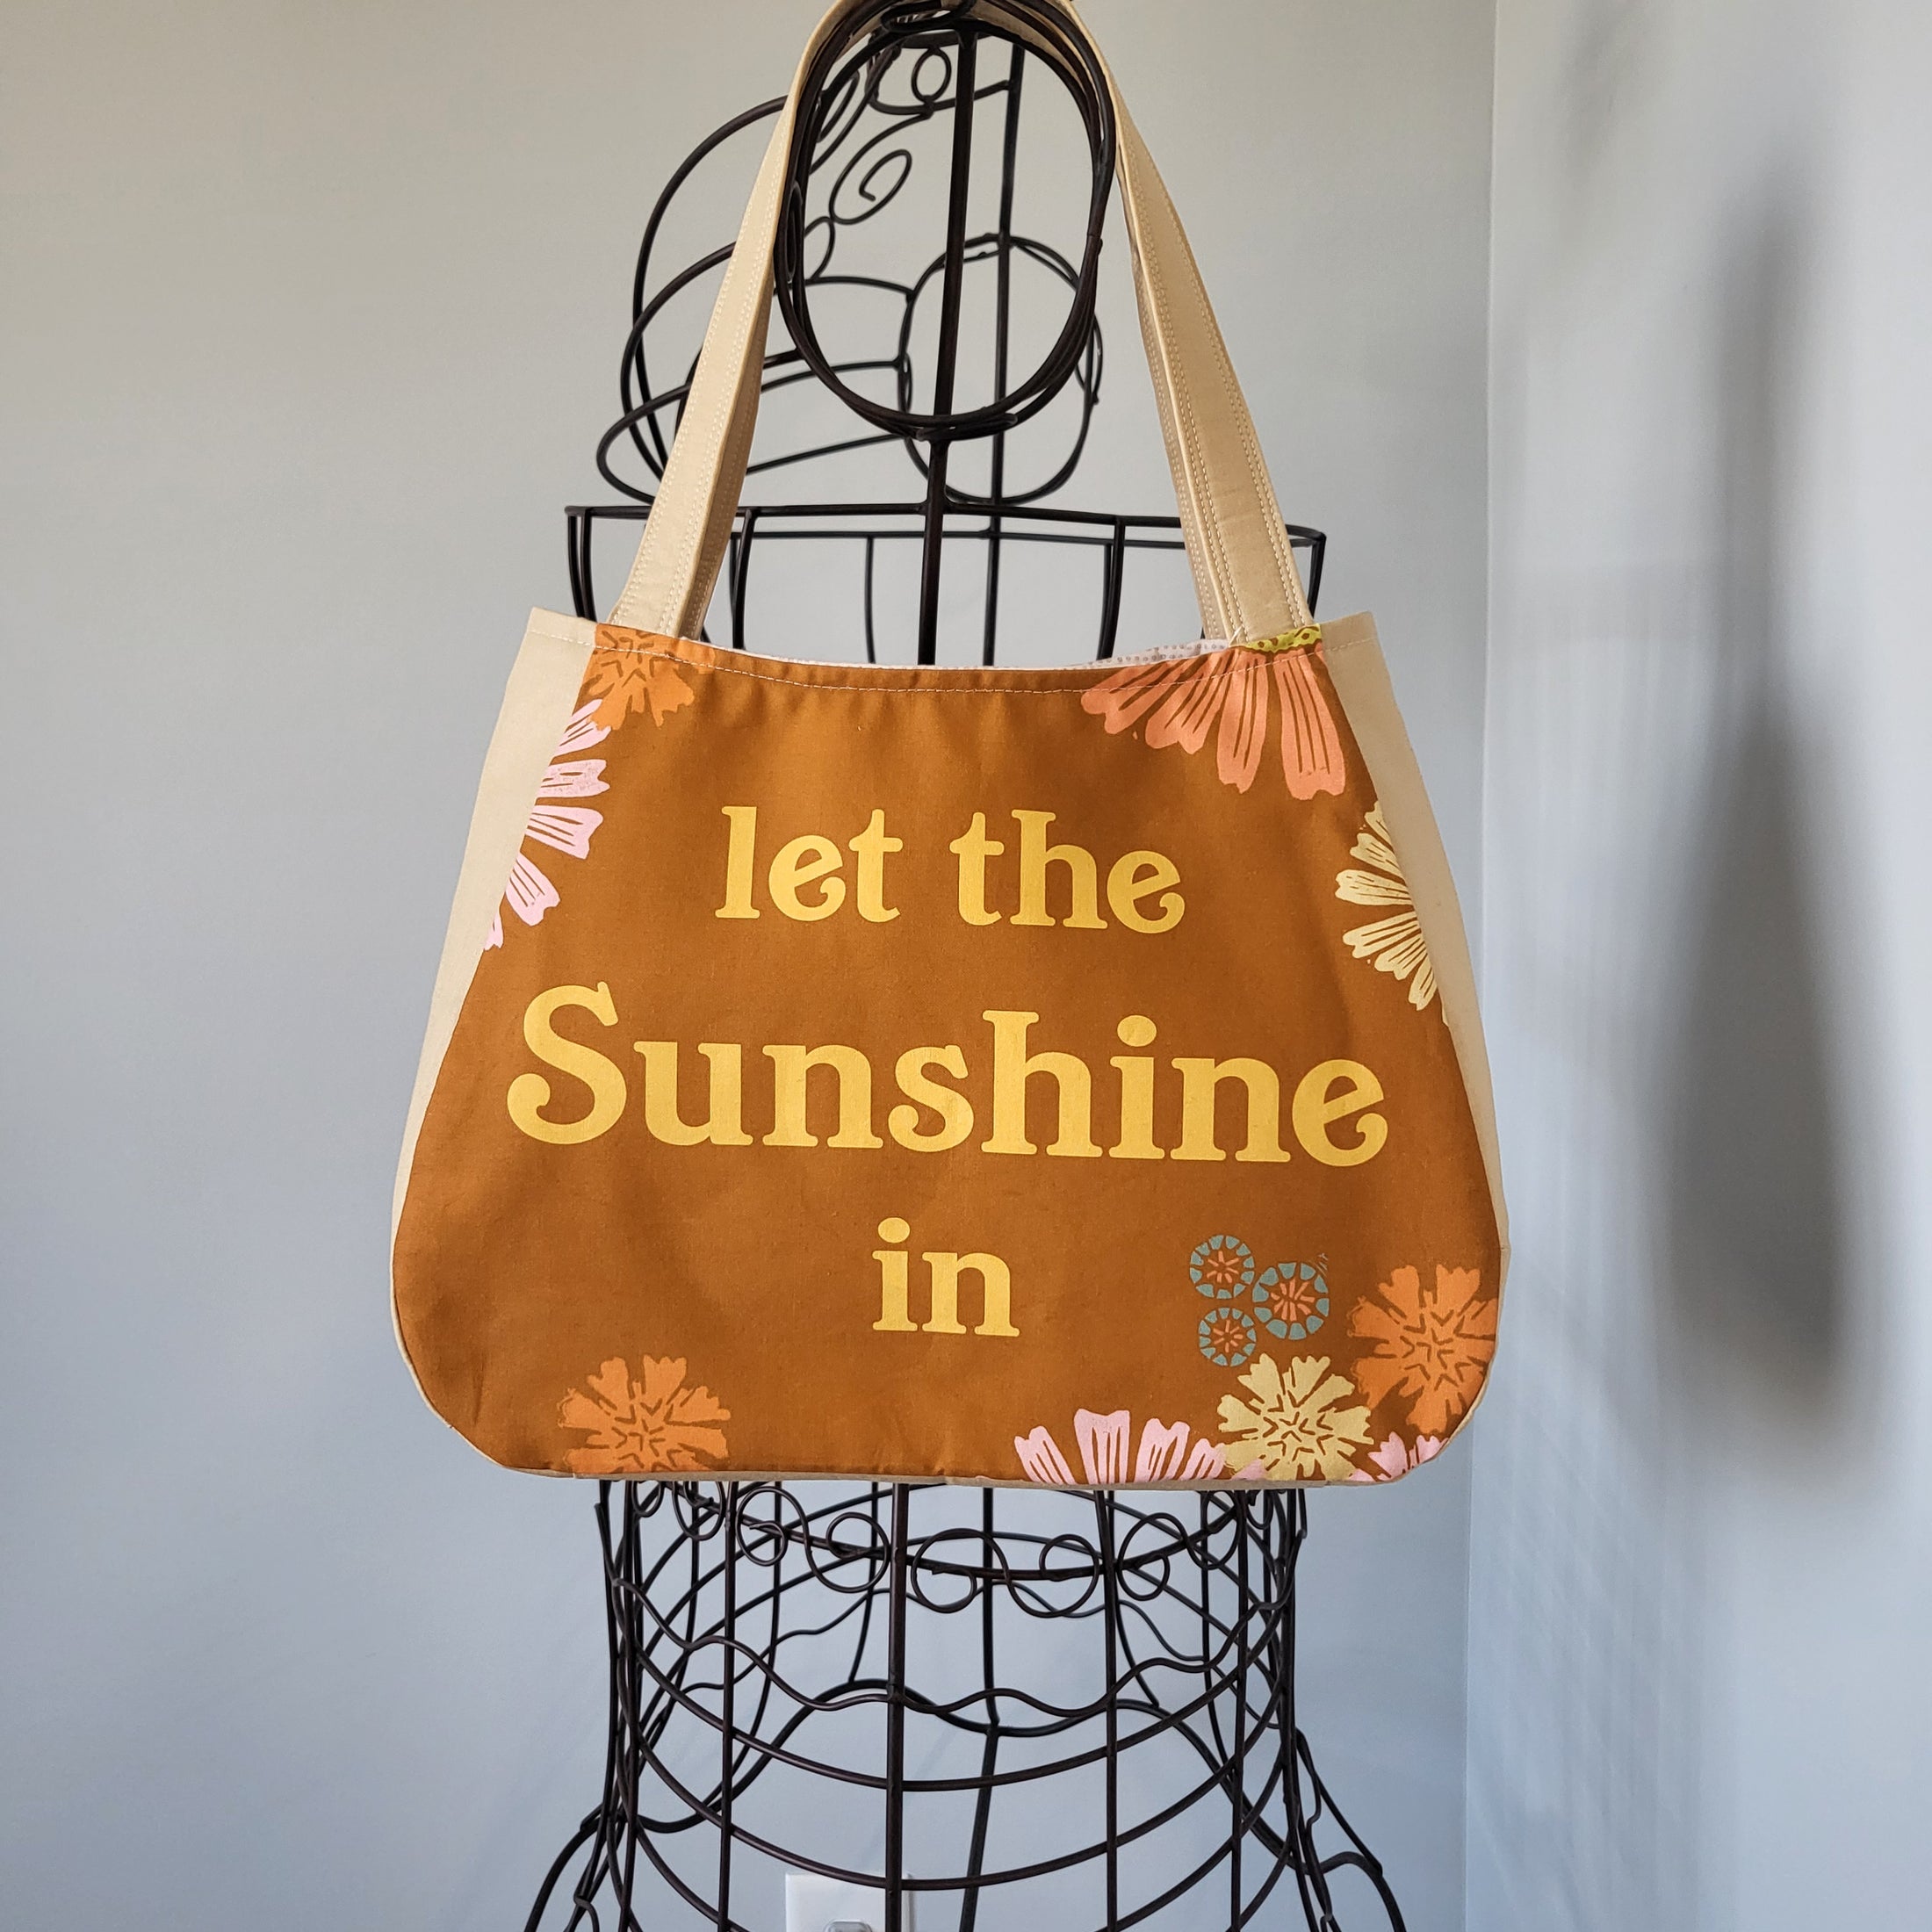 Let the sunshine in panel tote bag.